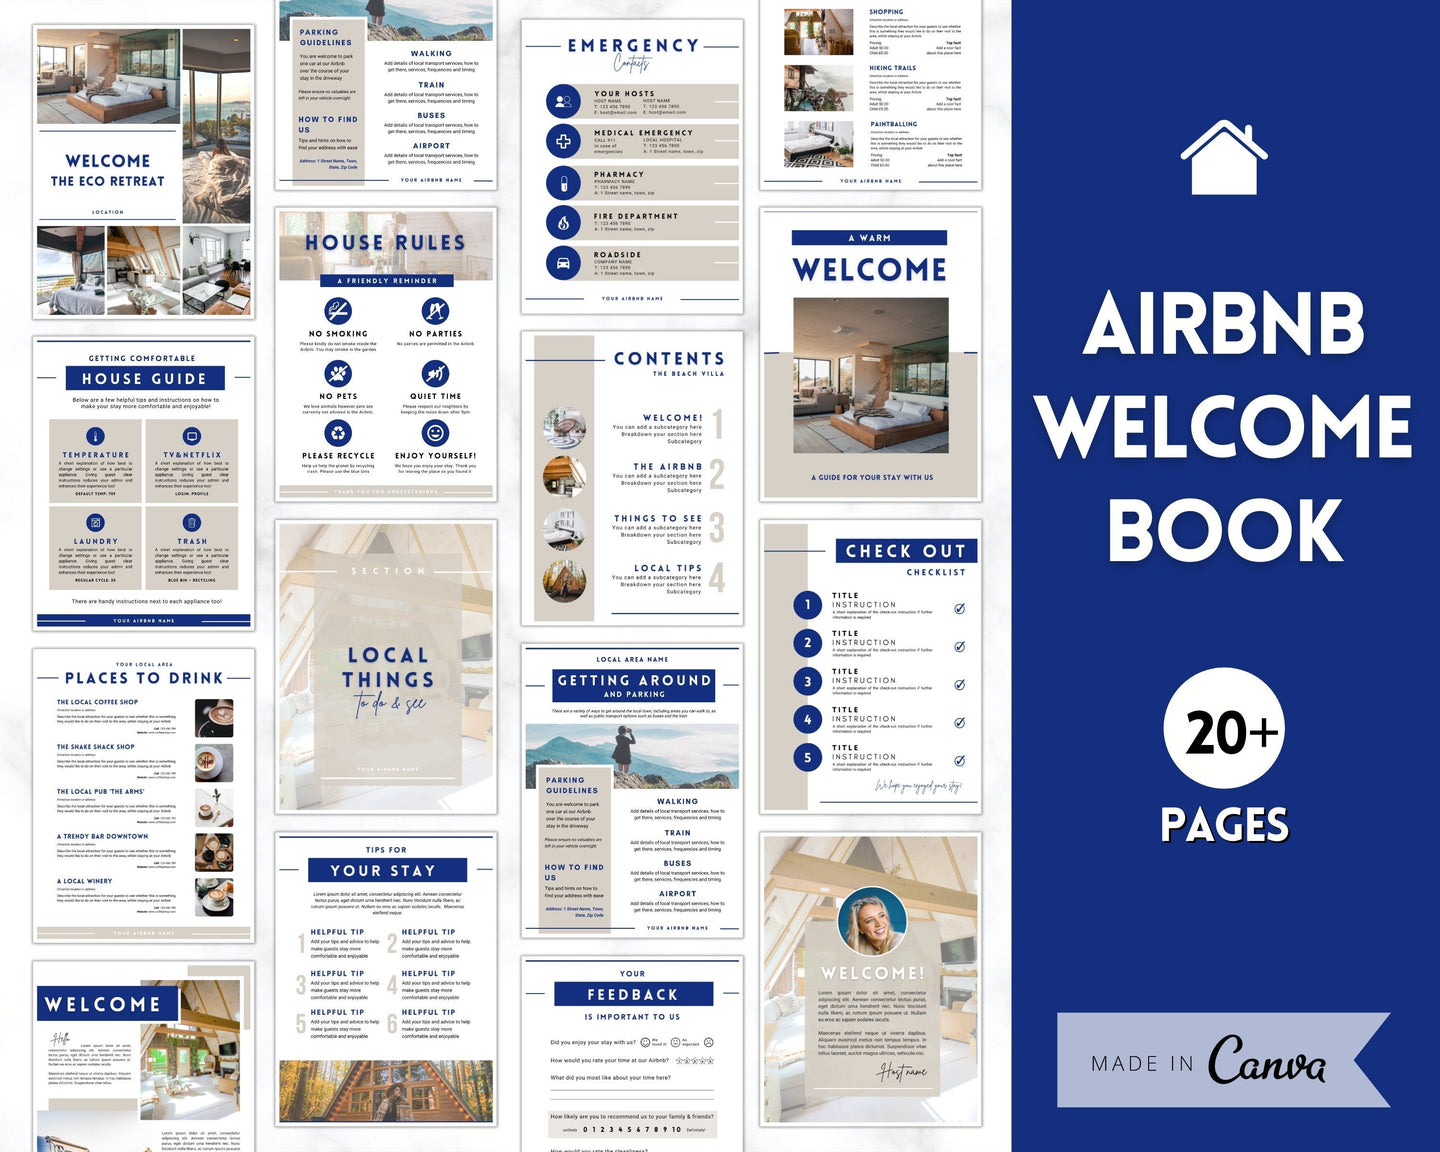 Airbnb Welcome Book Template, Editable Canva Welcome Guide, Air bnb House manual, Superhost eBook, Host signs, Signage, VRBO Vacation Rental | Navy